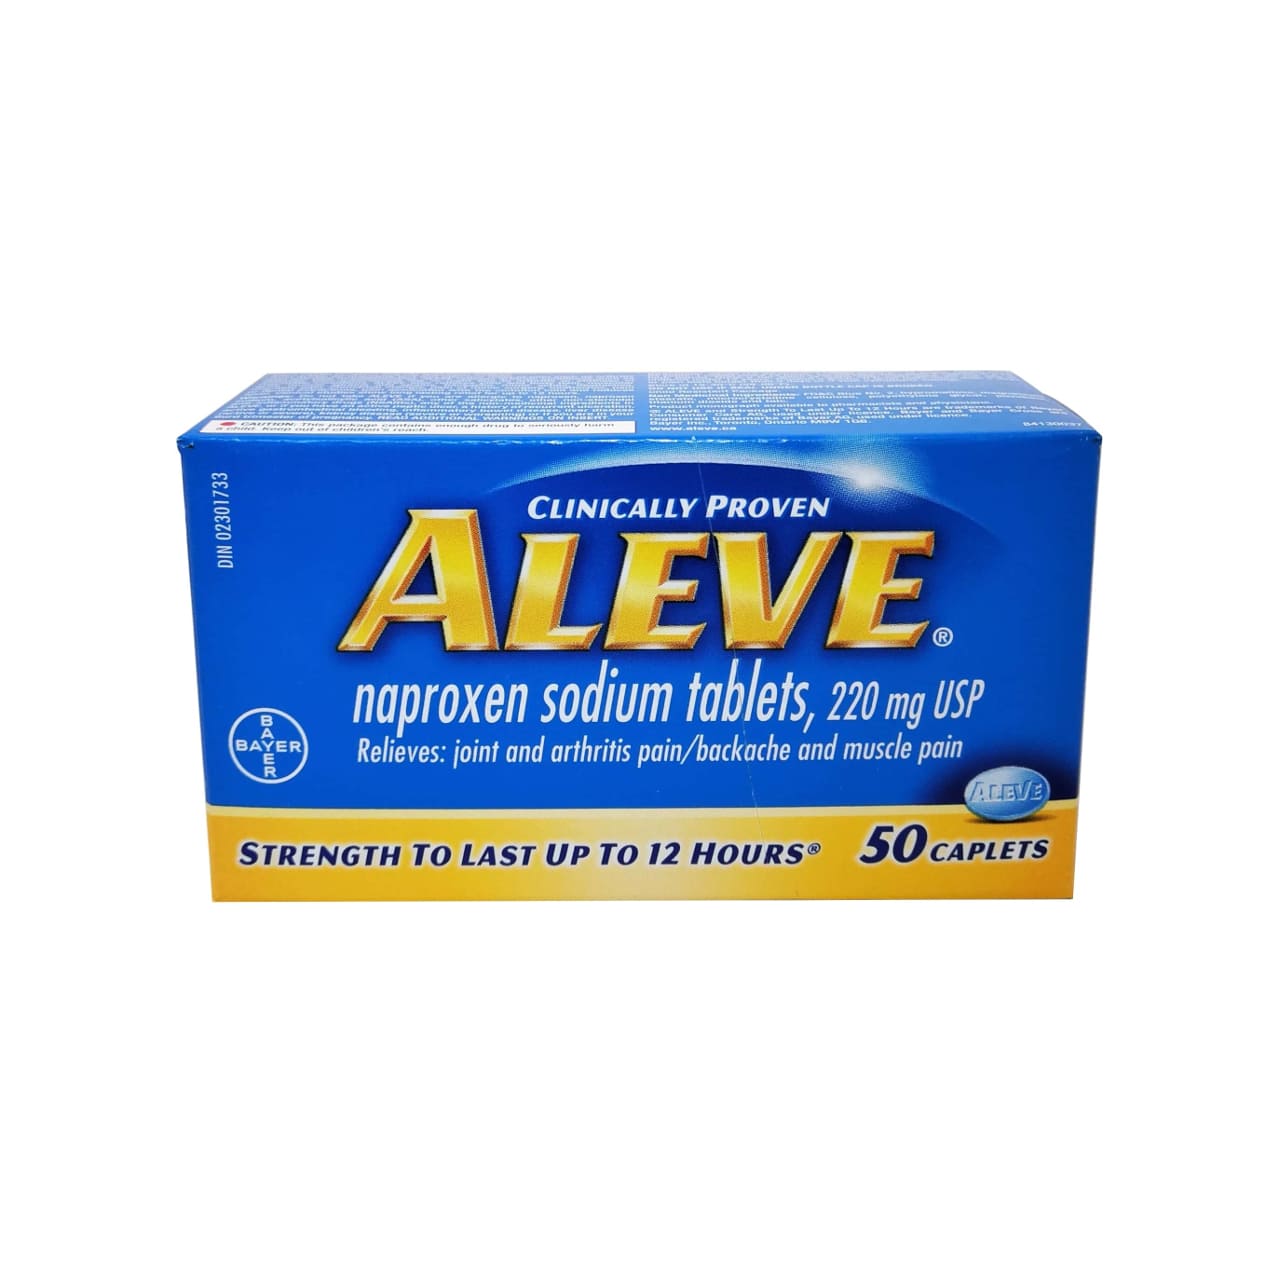 Product label for Aleve Naproxen Sodium 220mg (50 caplets) in English